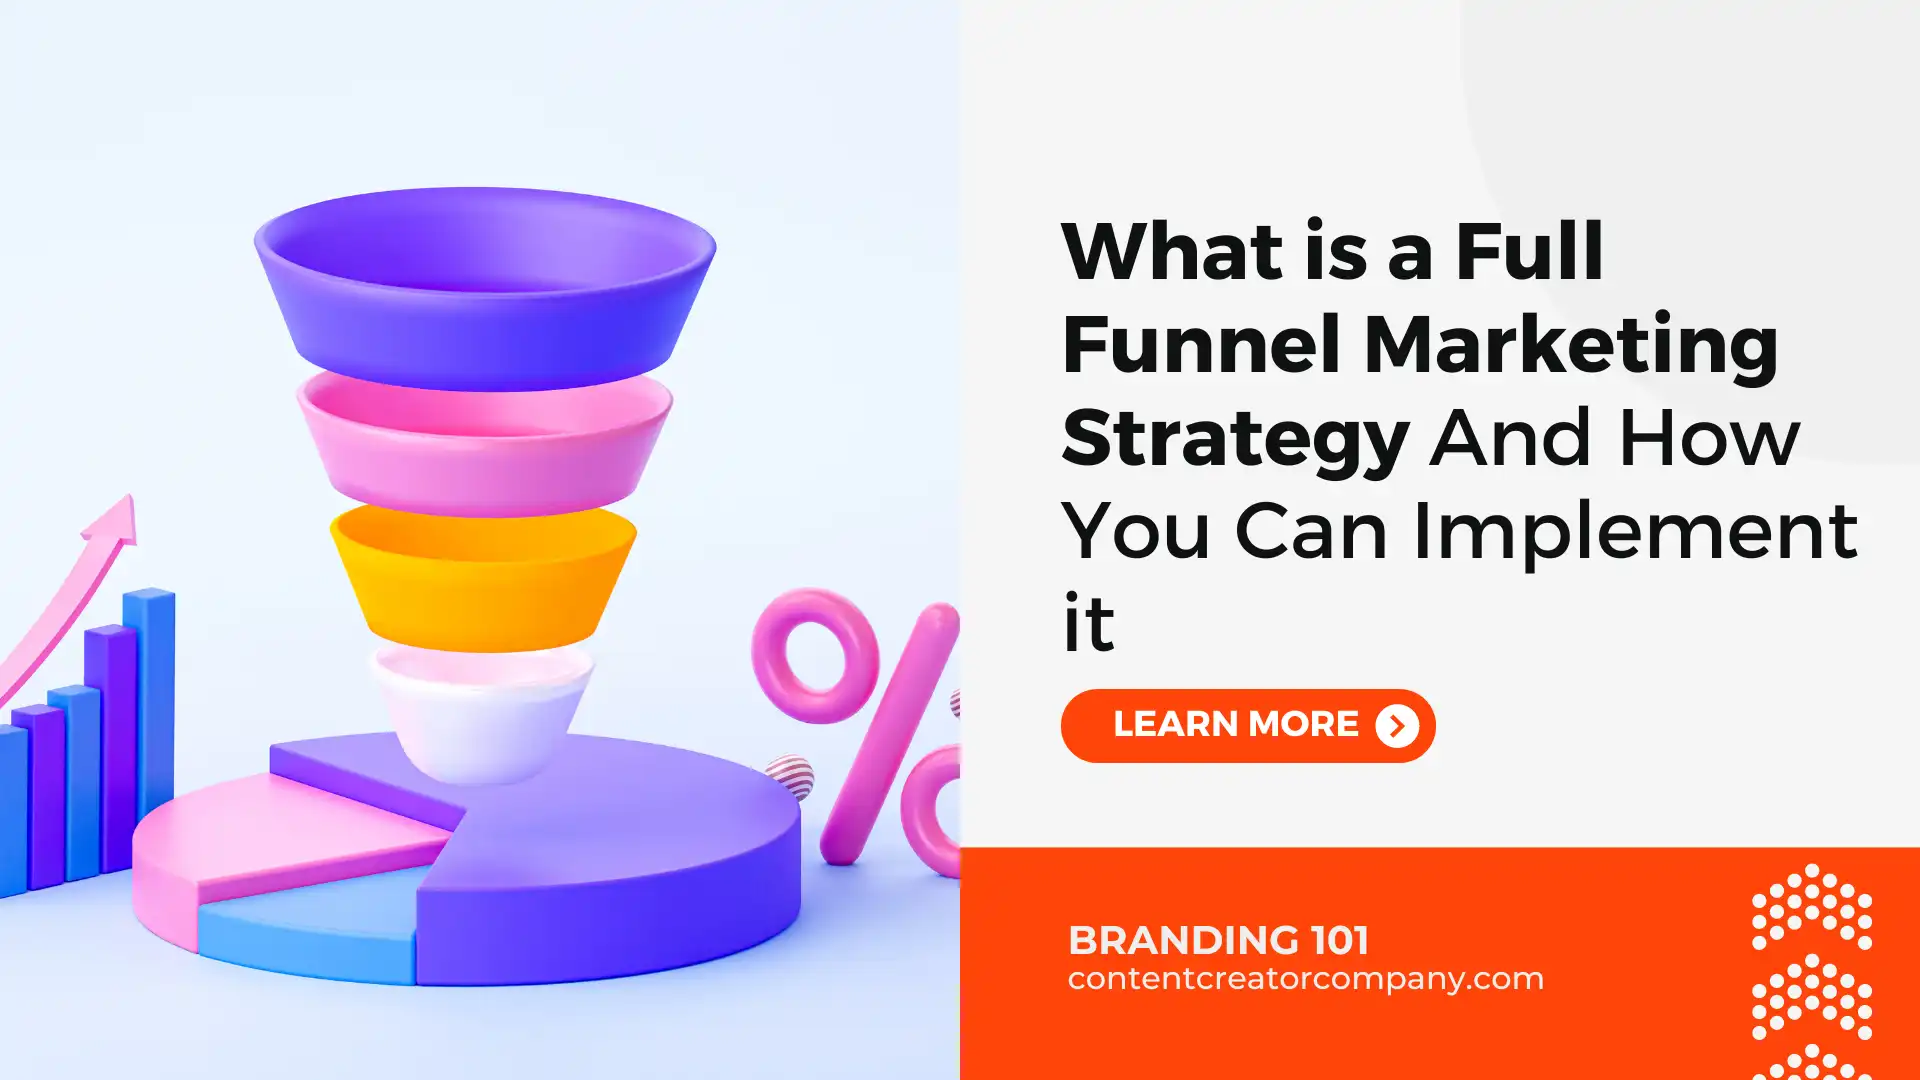 What is a Full Funnel Marketing Strategy And How You Can Implement it